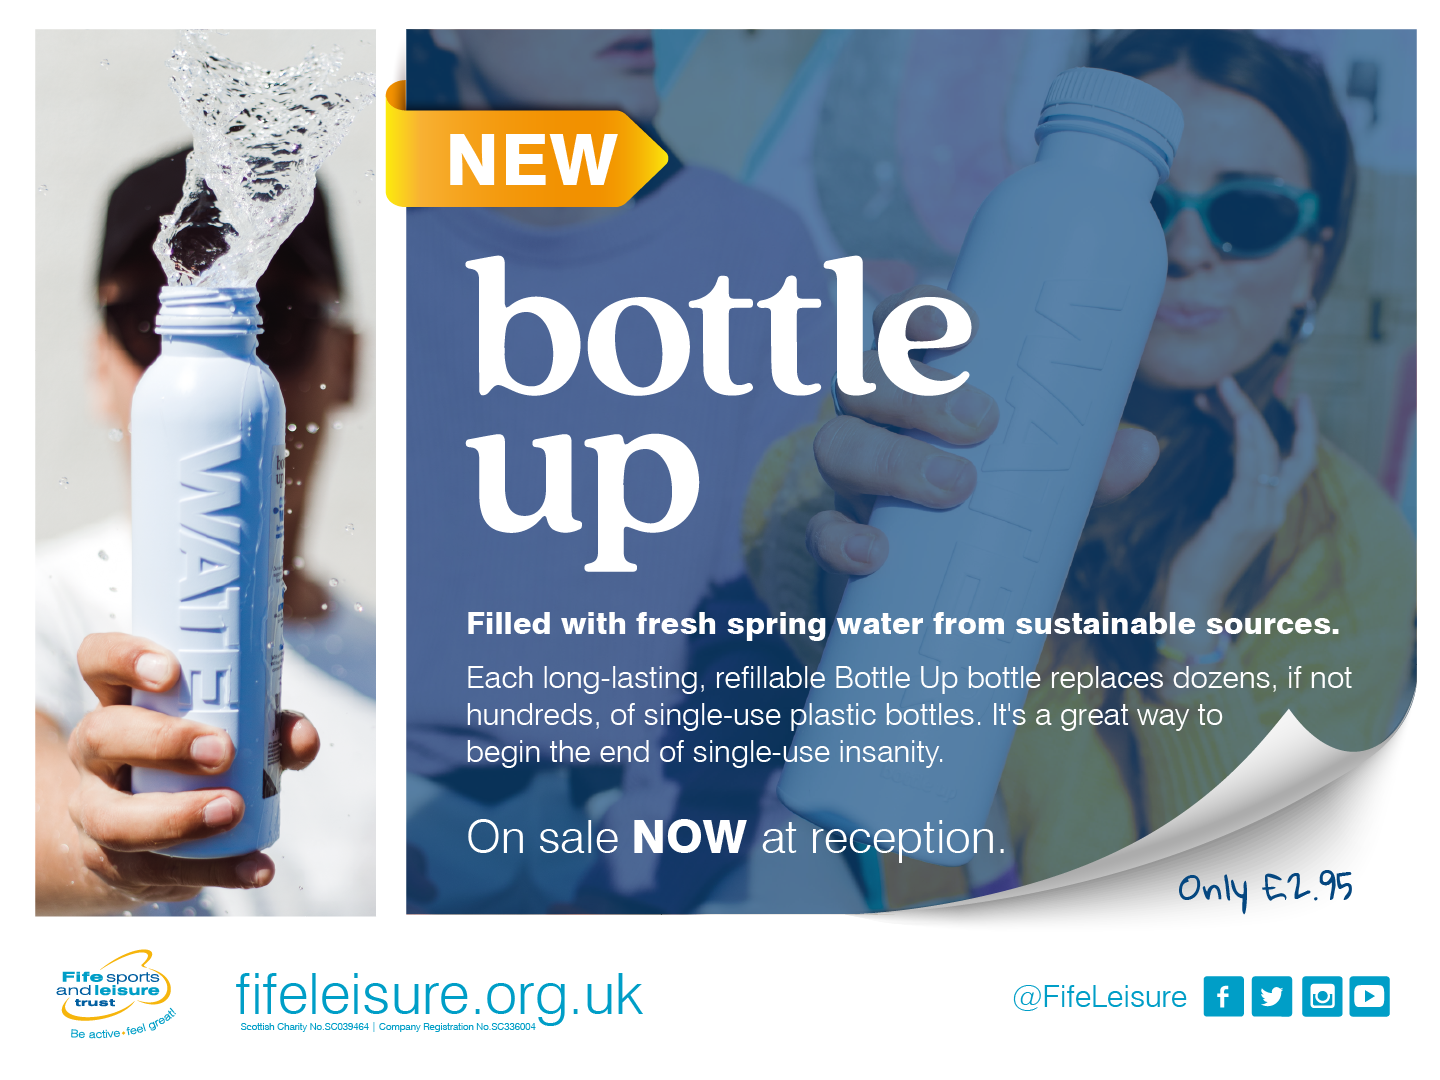 Bottle Up - available now!